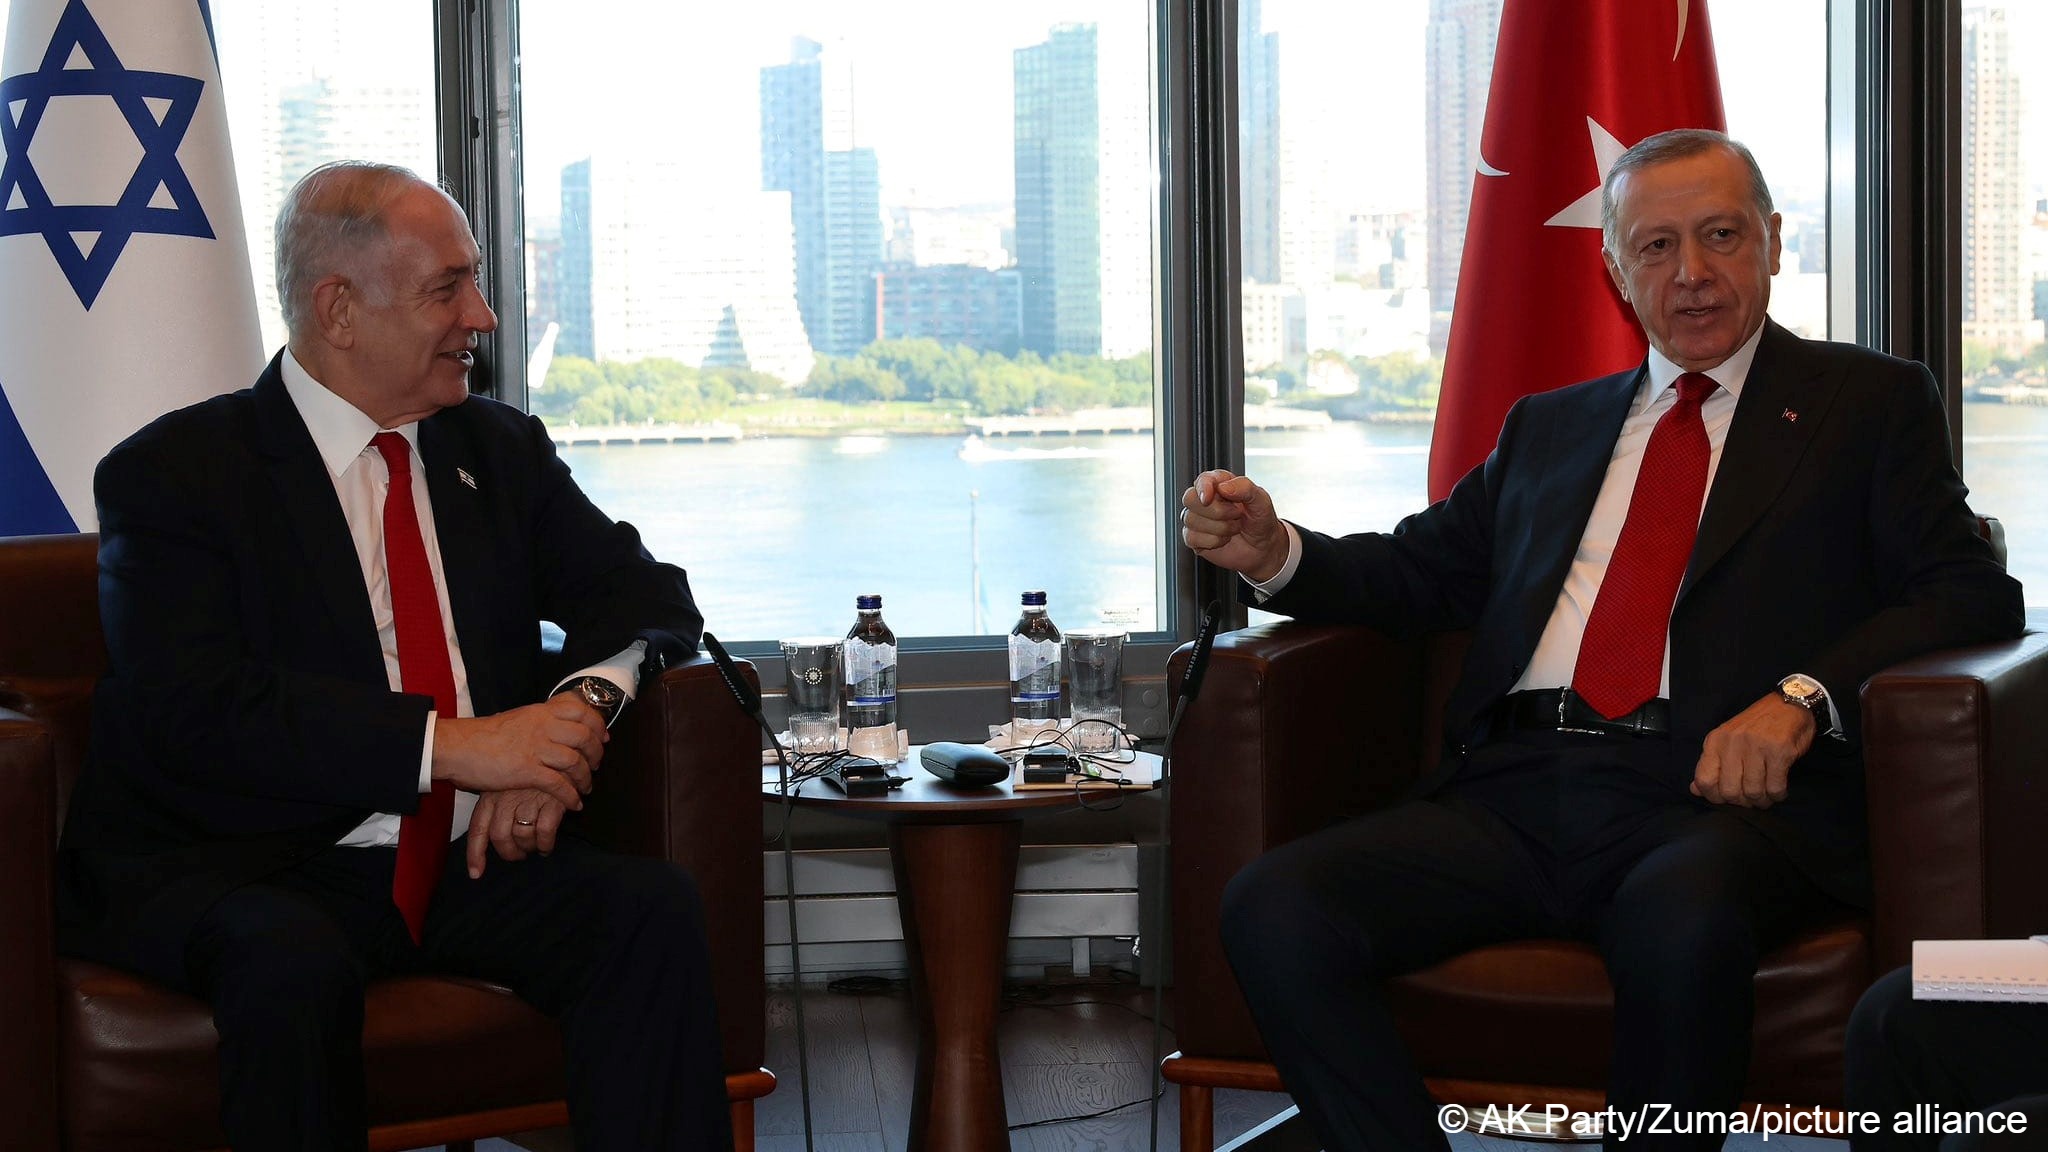 Turkish President Recep Tayyip Erdogan (right) speaks while Israeli Prime Minister Benjamin Netanyahu (left) smiles at him, both men are sitting in leather armchairs, the New York skyline can be seen through the window behind them, Turkish House, New York, USA, 19 September 2023 